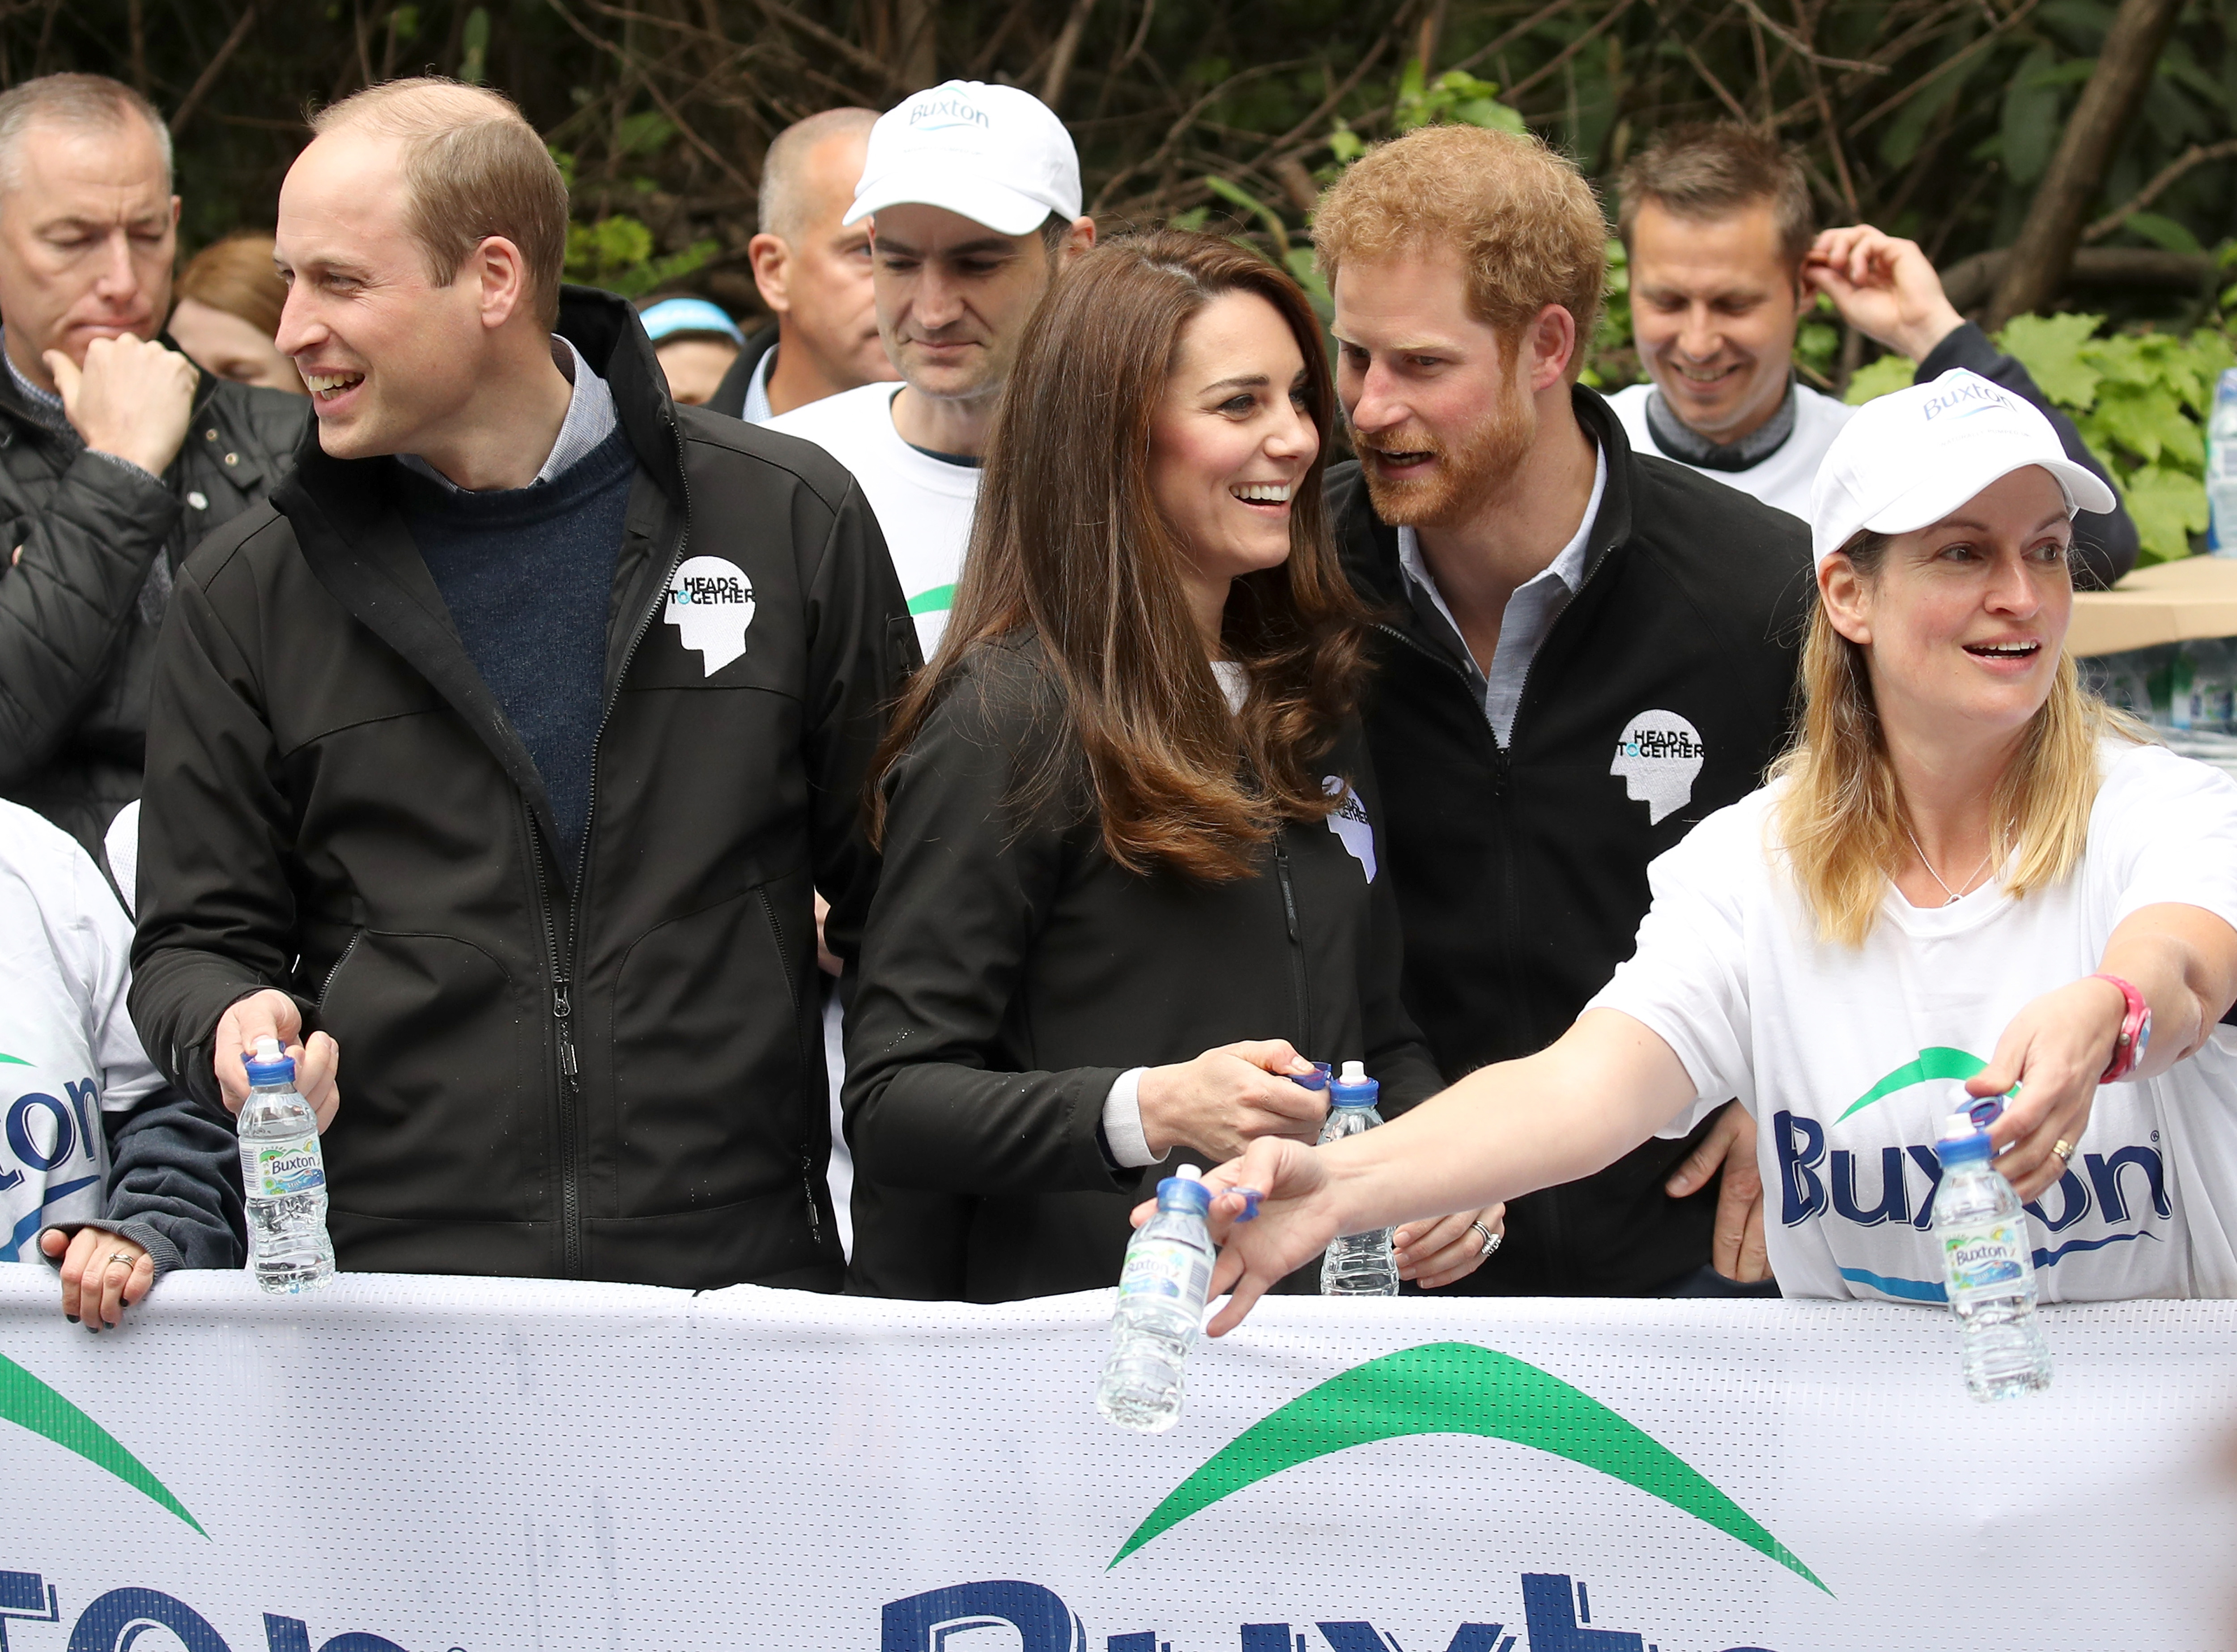 Prince William, Princess Catherine, and Prince Harry cheering on and handing out water to runners during the 2017 Virgin Money London Marathon on April 23, 2017, in London, England. | Source: Getty Images